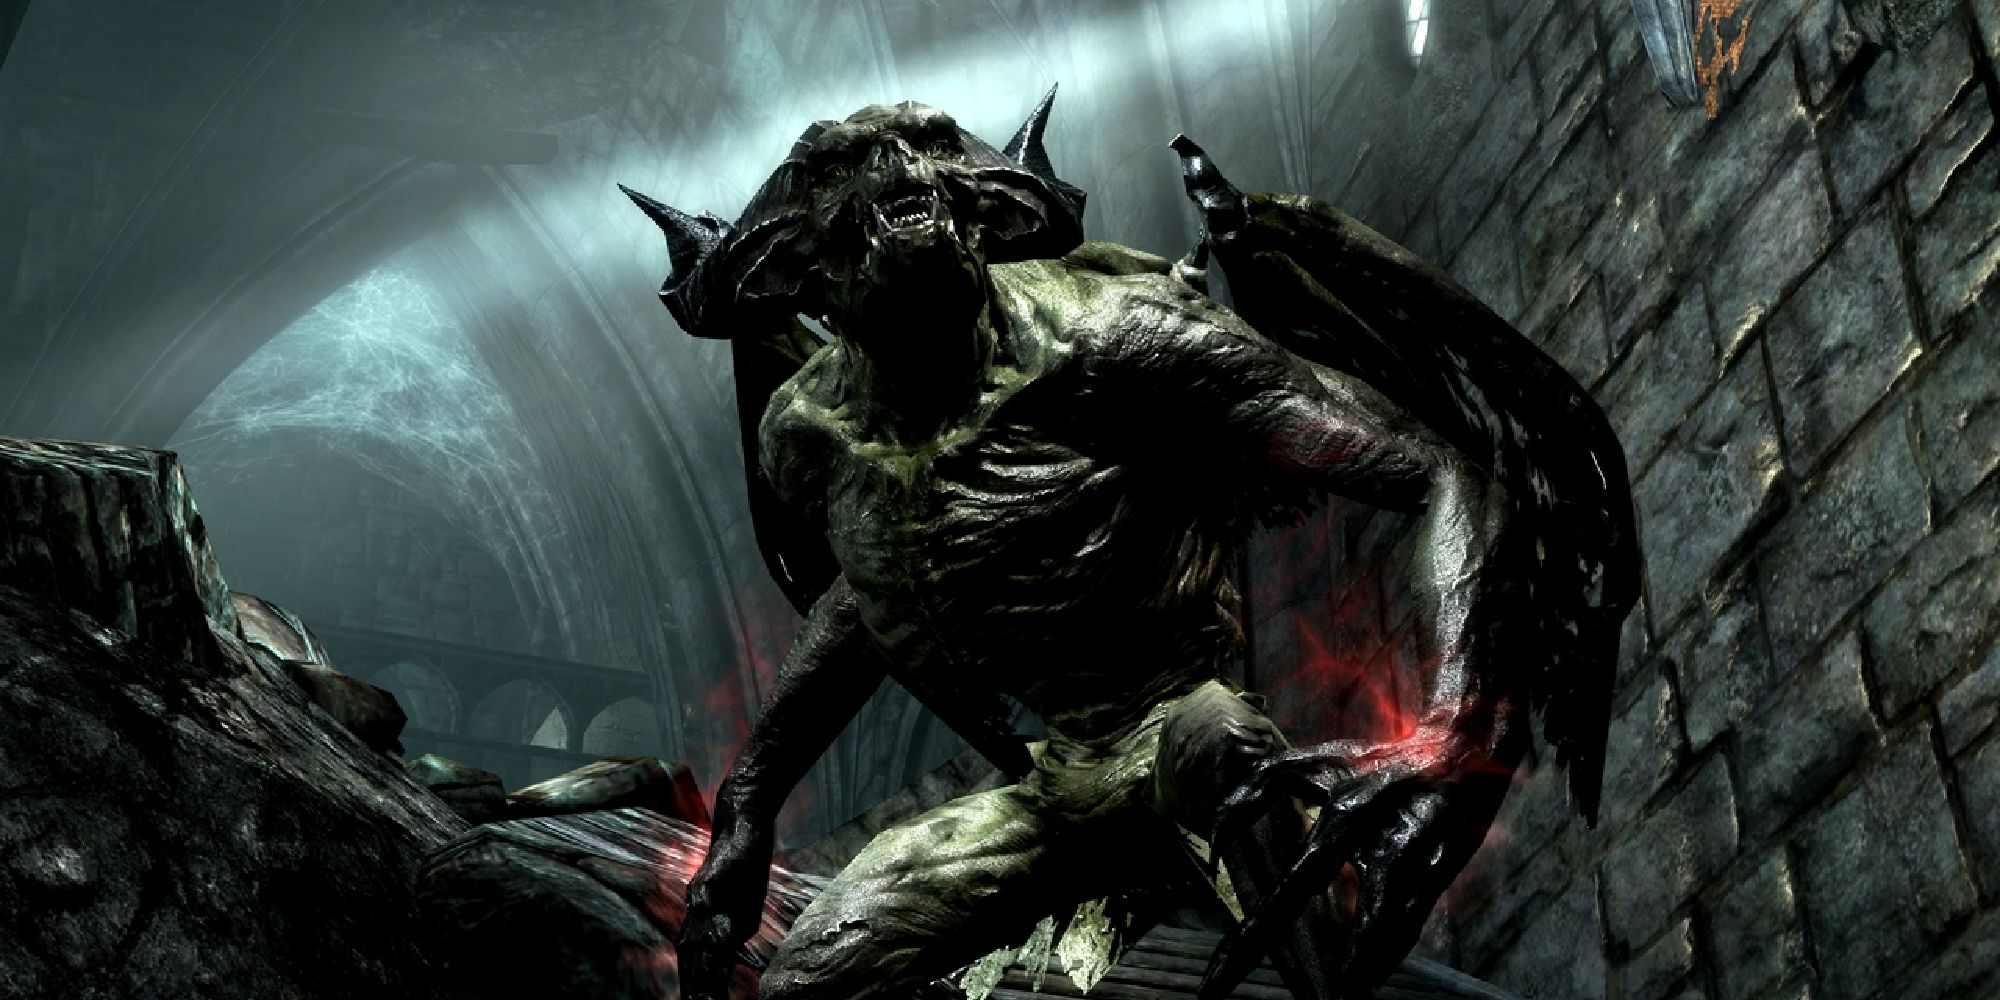 A vampire-lord as shown in the dawnguard expansion for Skyrim